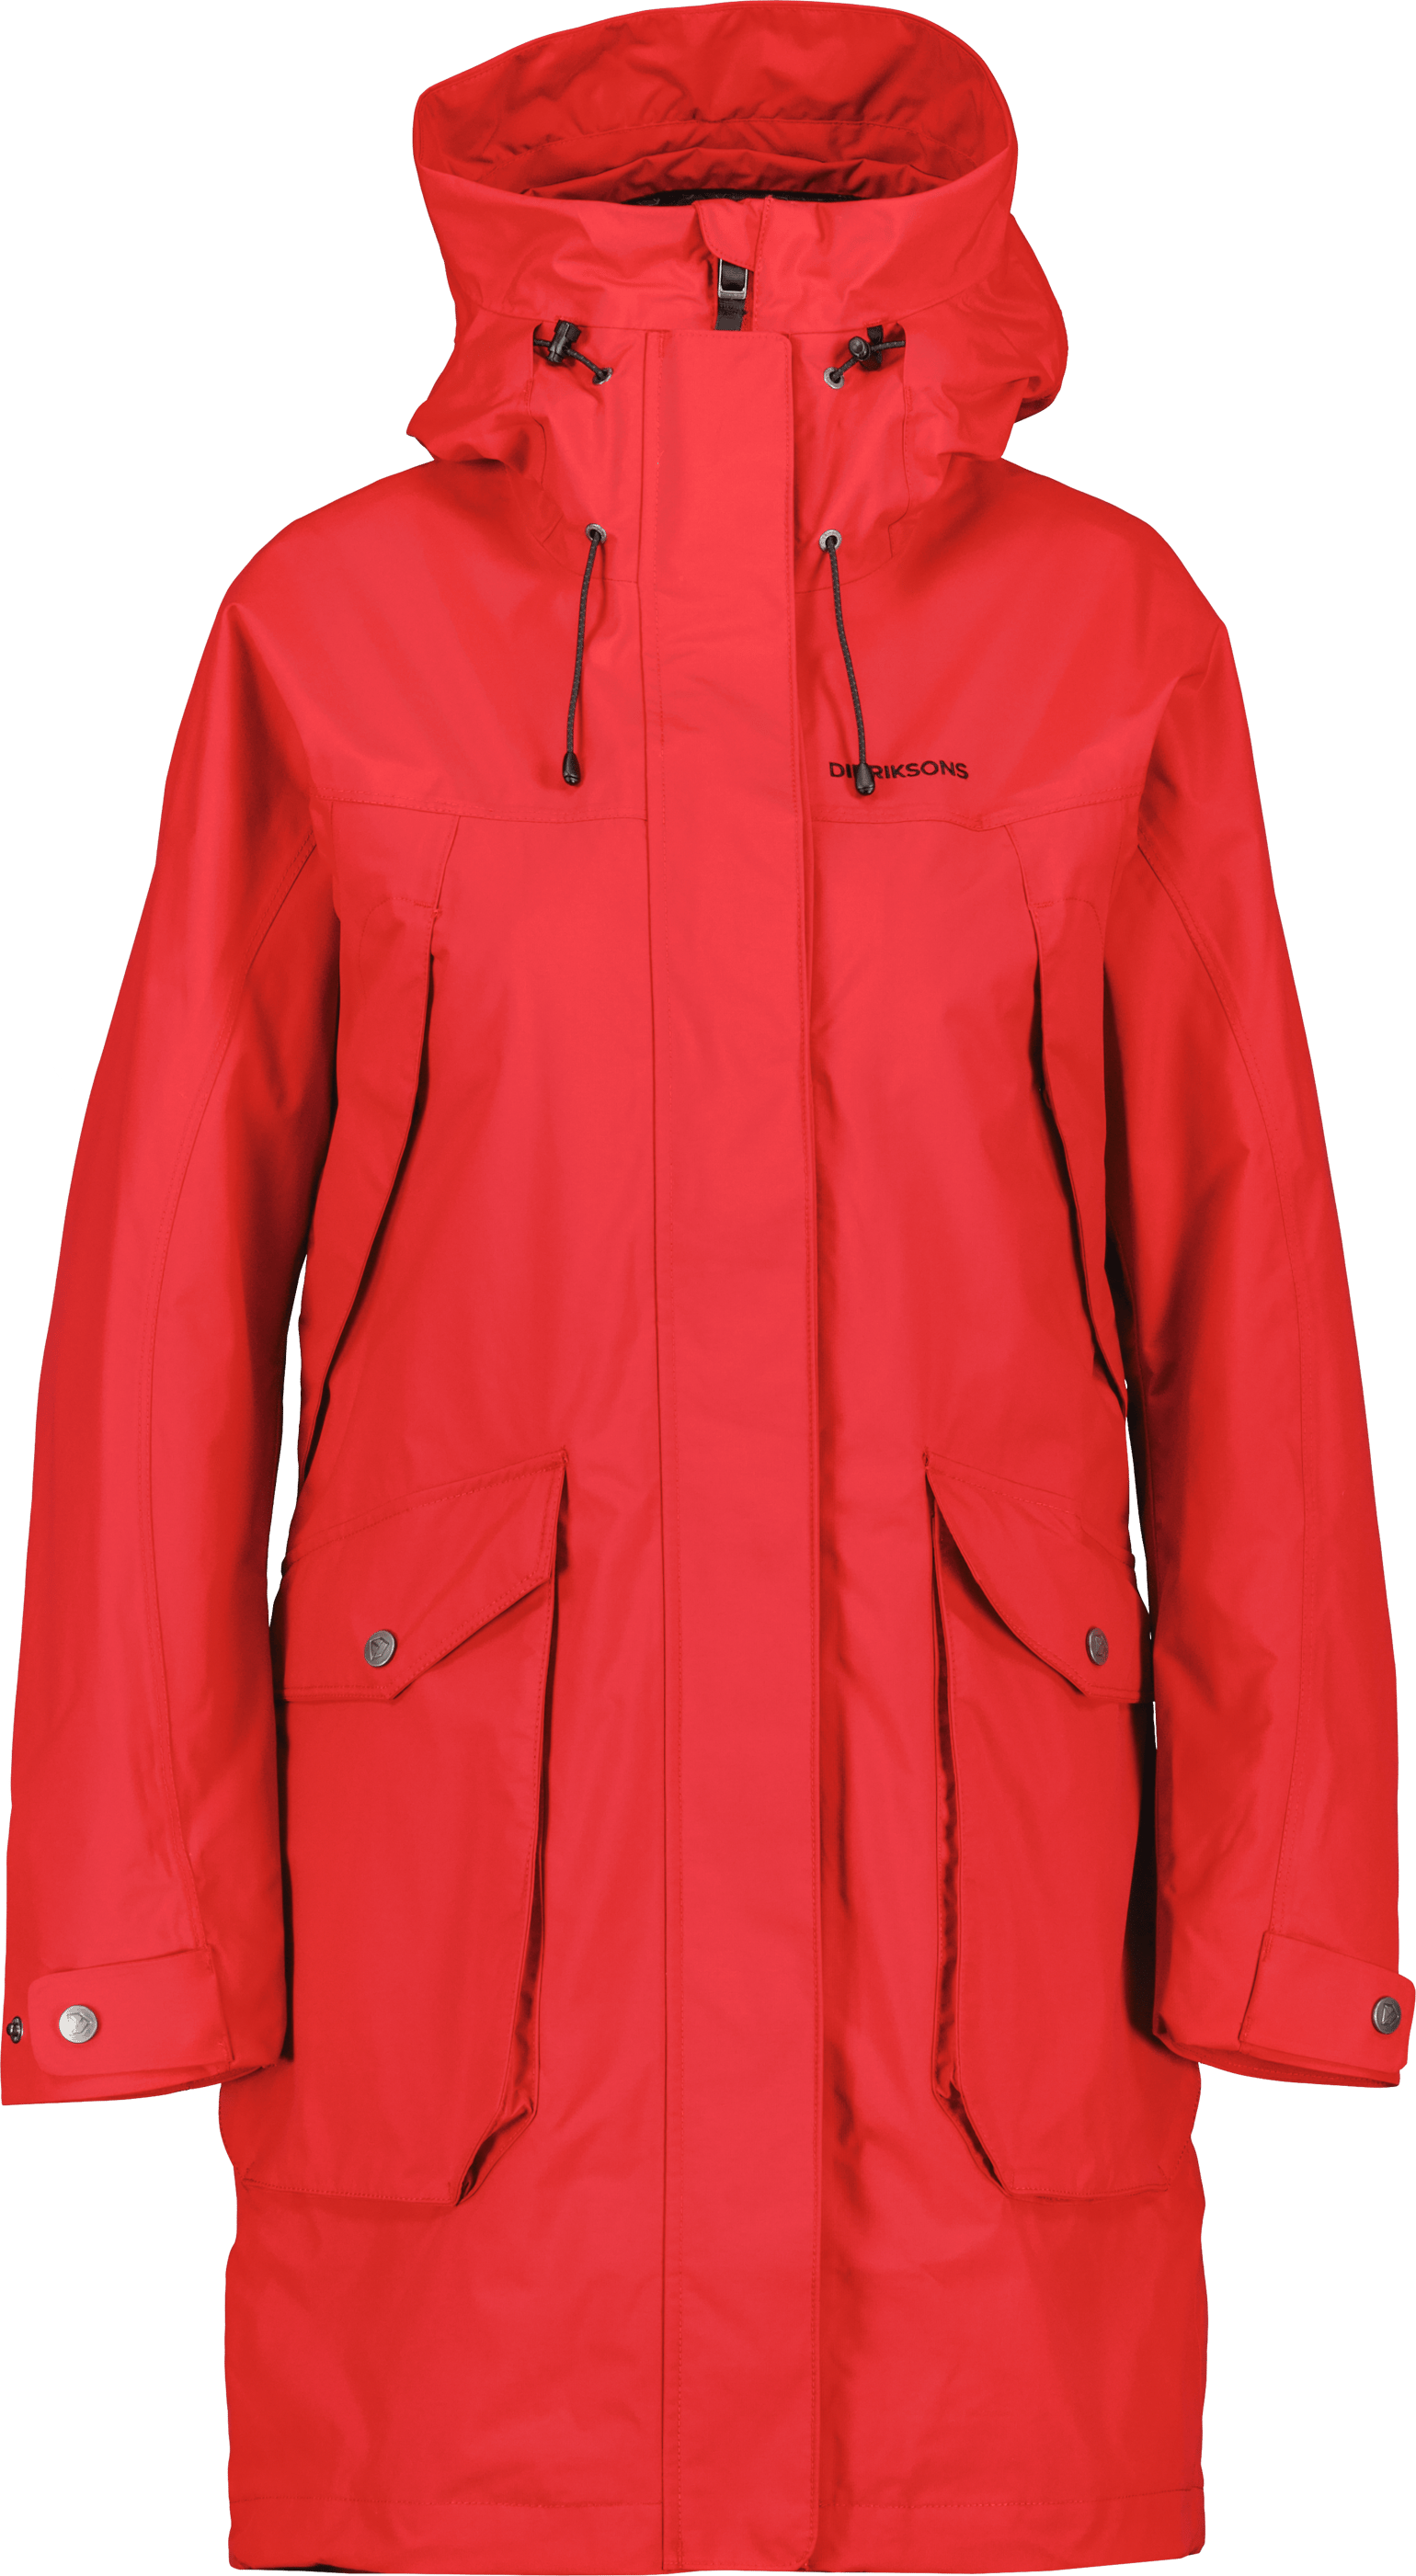 Didriksons Women's Thelma Parka 10 Pomme Red